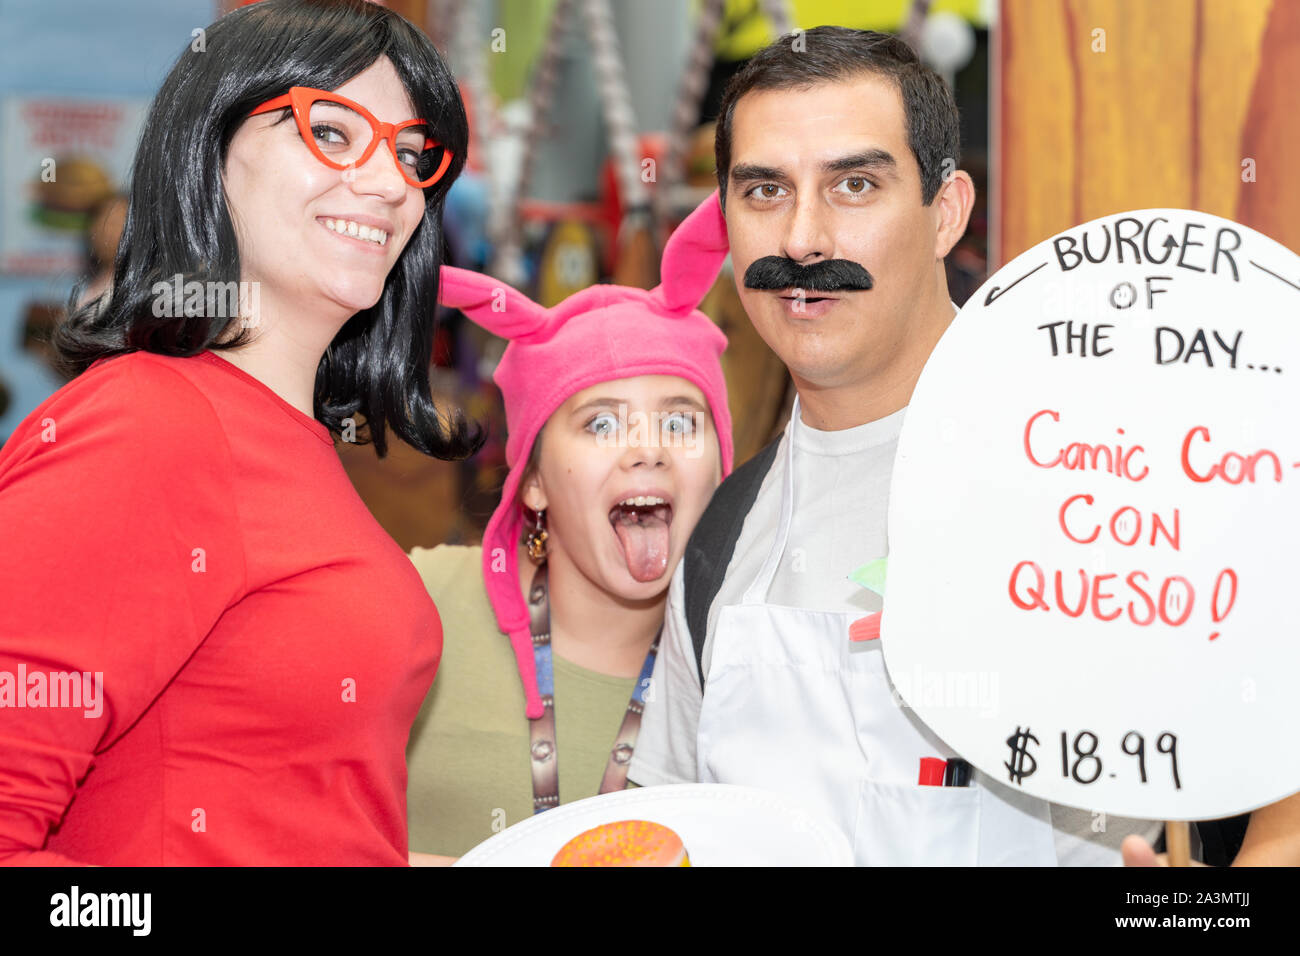 New York, New York - October 6, 2019: Family of cosplayers dressed as Bob's Burger characters during New York Comic. Stock Photo